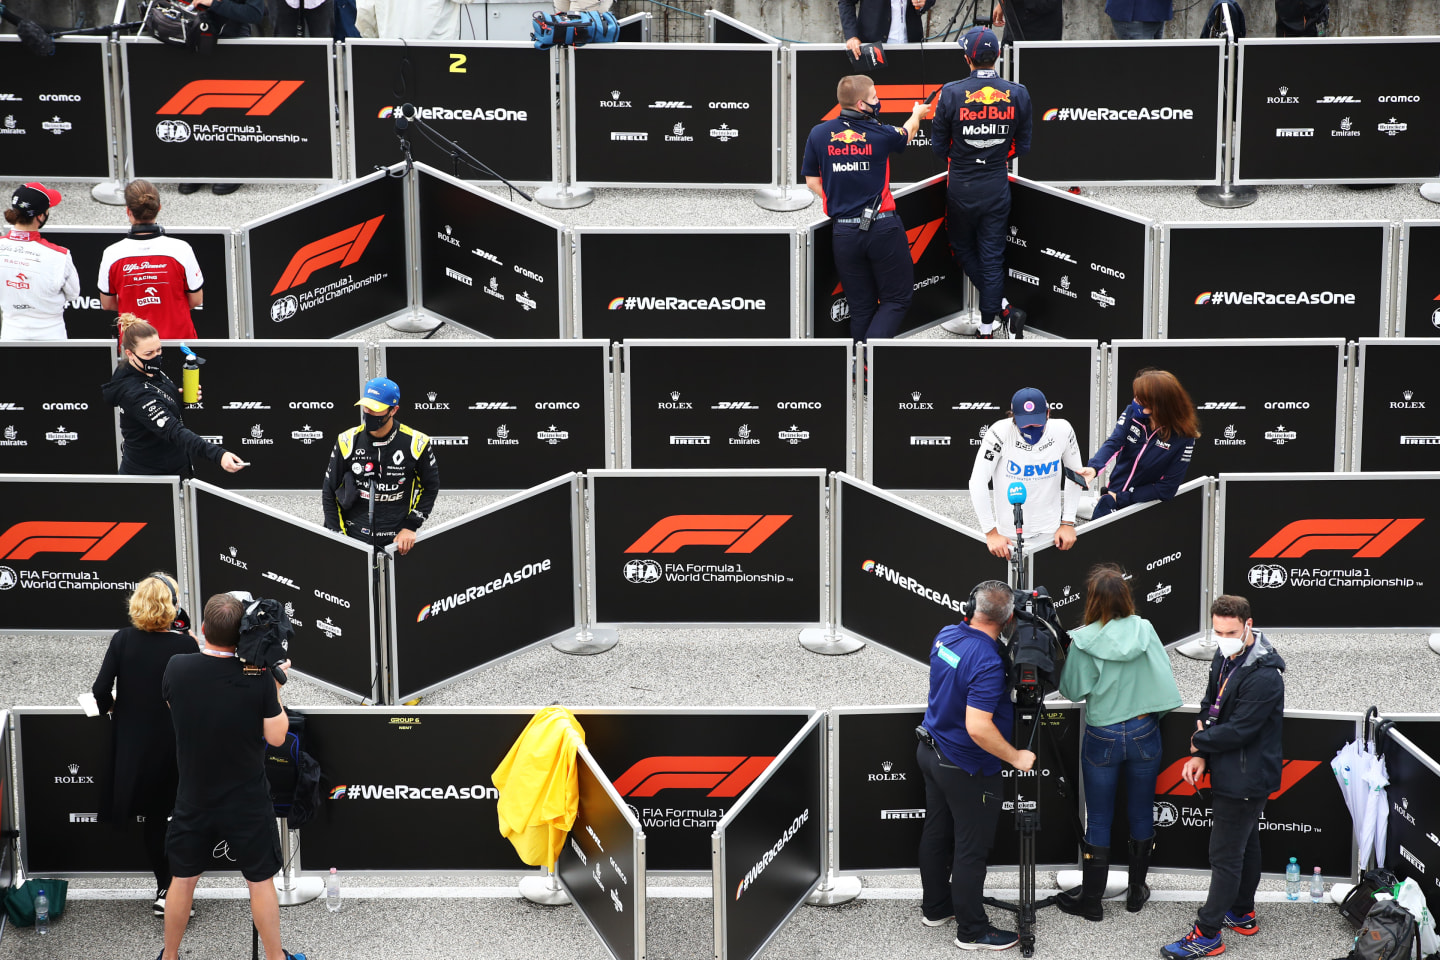 BUDAPEST, HUNGARY - JULY 19: A general view as drivers are interviewed after the Formula One Grand